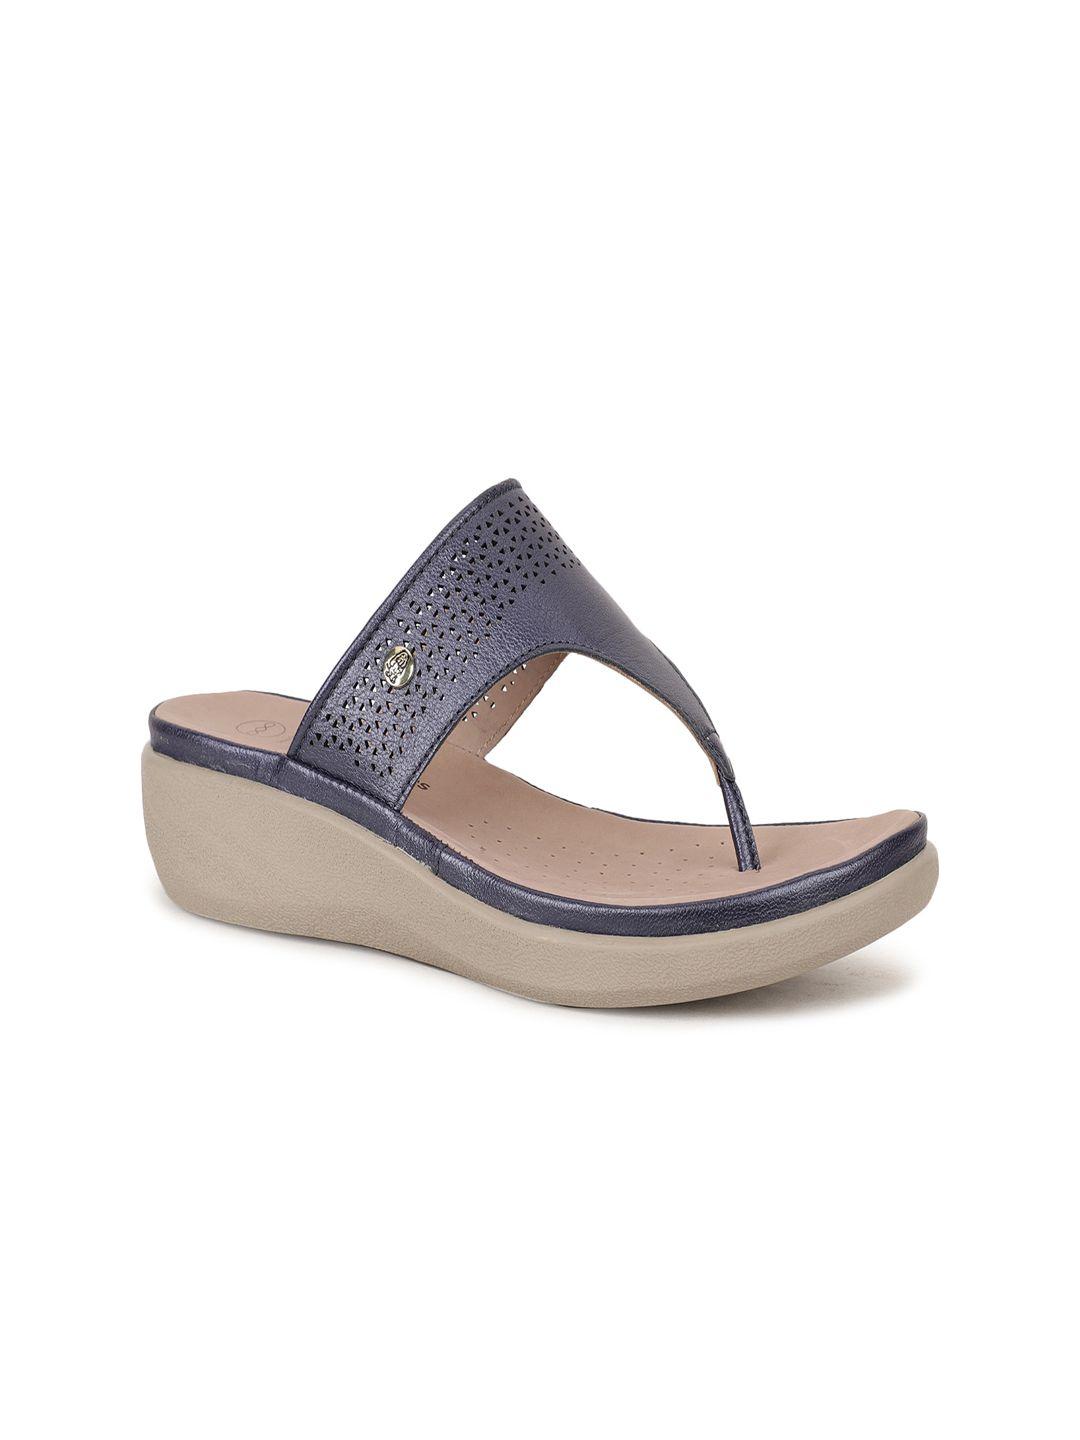 hush puppies blue leather wedge sandals with laser cuts